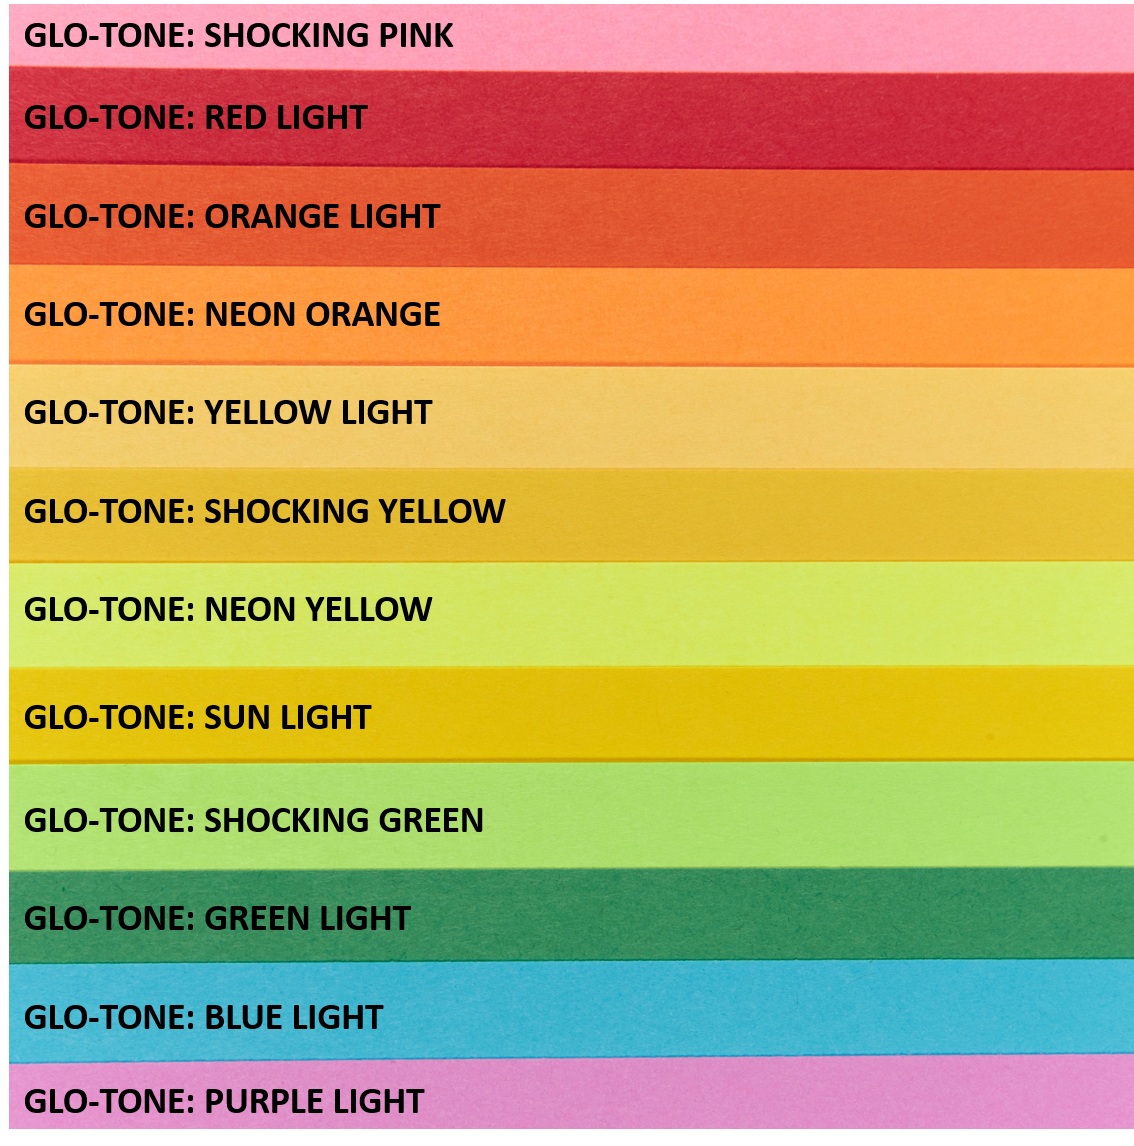 Shocking Pink Paper (Glo-Tone, Text Weight) – French Paper